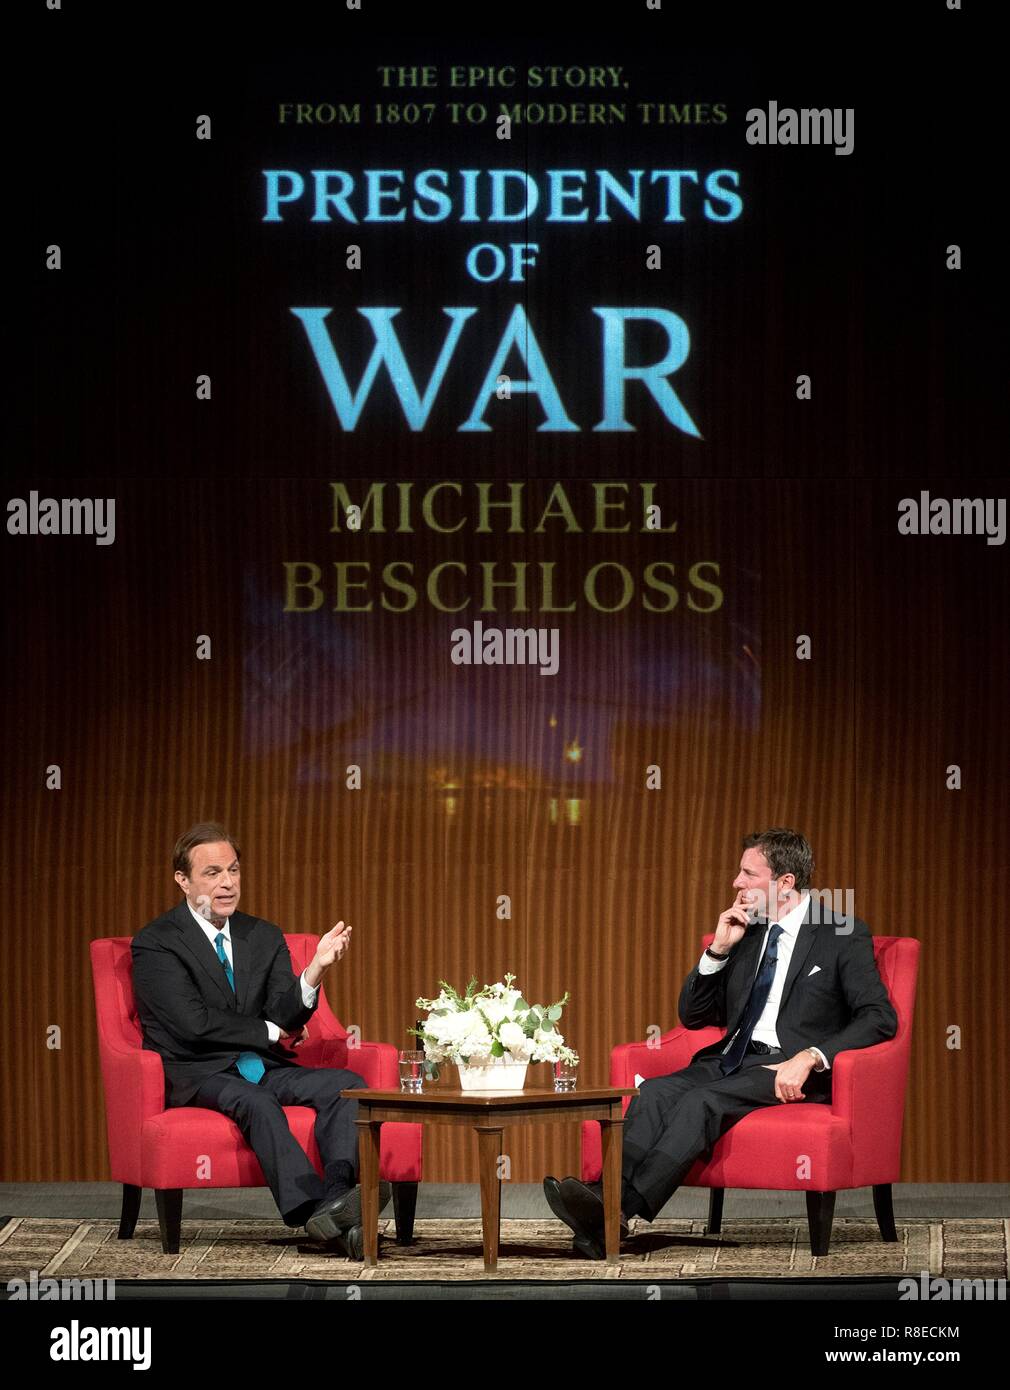 Presidential biographer and historian Michael Beschloss  discusses his latest book, Presidents of War: The Epic Story, from 1807 to Modern Times, and discussed the life and legacy of the late President George H.W. Bush moderated by LBJ Foundation President and CEO Mark Updegrove, right, at the LBJ Presidential Library December 11, 2018 in Austin, Texas. Stock Photo